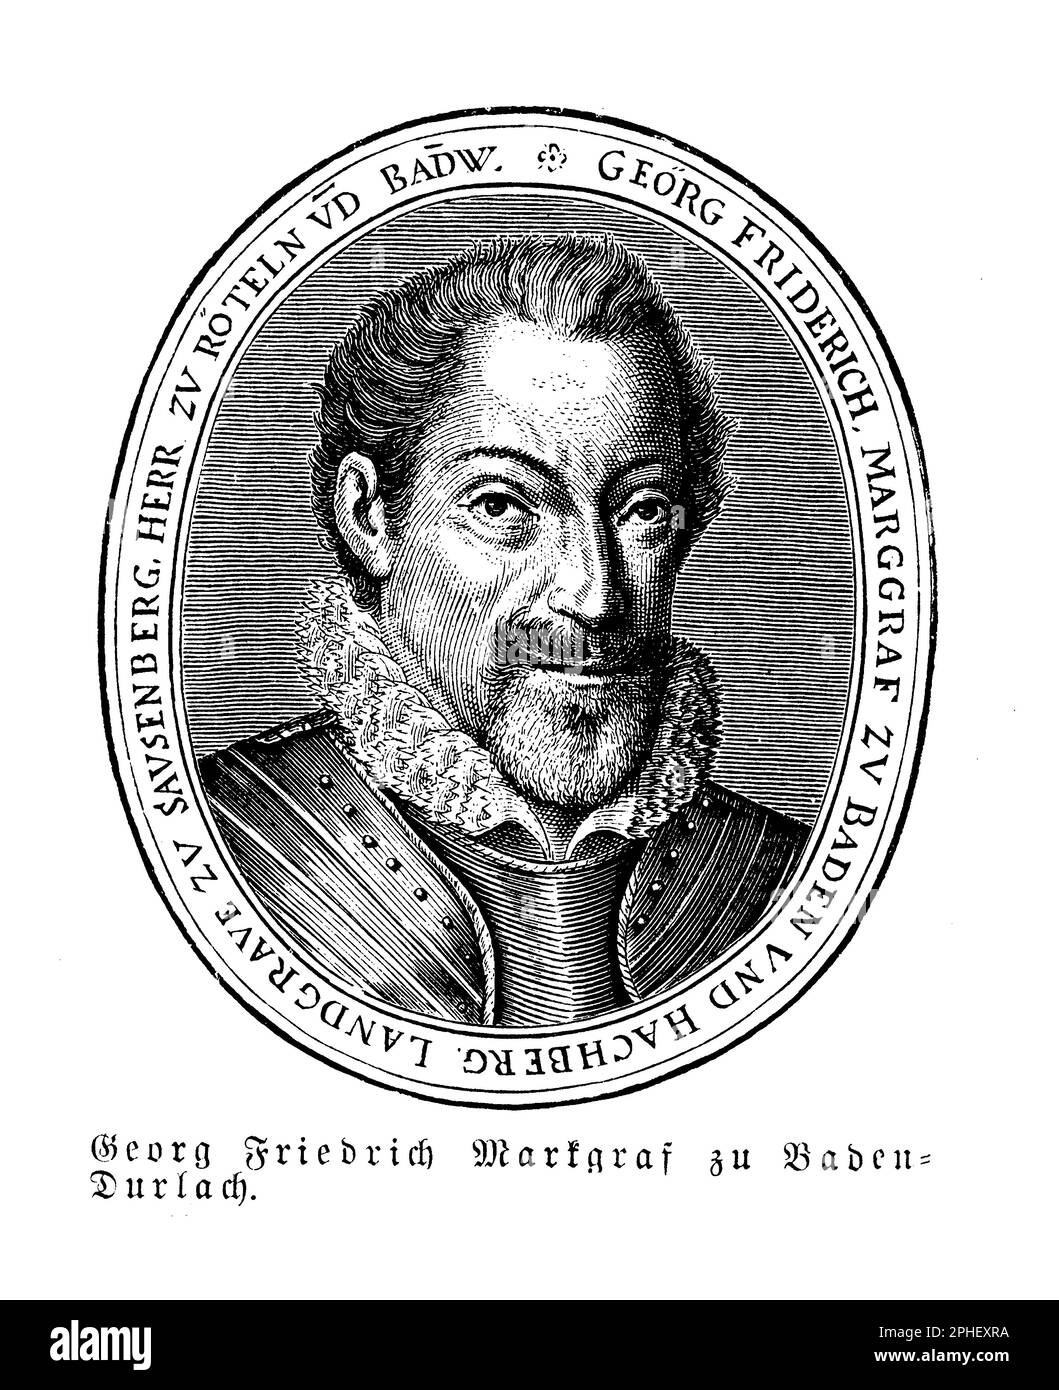 Georg Friedrich (1573-1638) was the Margrave of Baden-Durlach, a territory in southwestern Germany. He was a key Protestant leader during the Thirty Years' War and played an important role in the defense of the Protestant cause in the region. Georg Friedrich was also a patron of the arts and sciences and his court in Karlsruhe became a center of humanistic learning and Baroque culture. He was known for his diplomacy and skillful negotiations, which helped him to maintain a level of autonomy for Baden-Durlach during the war Stock Photo